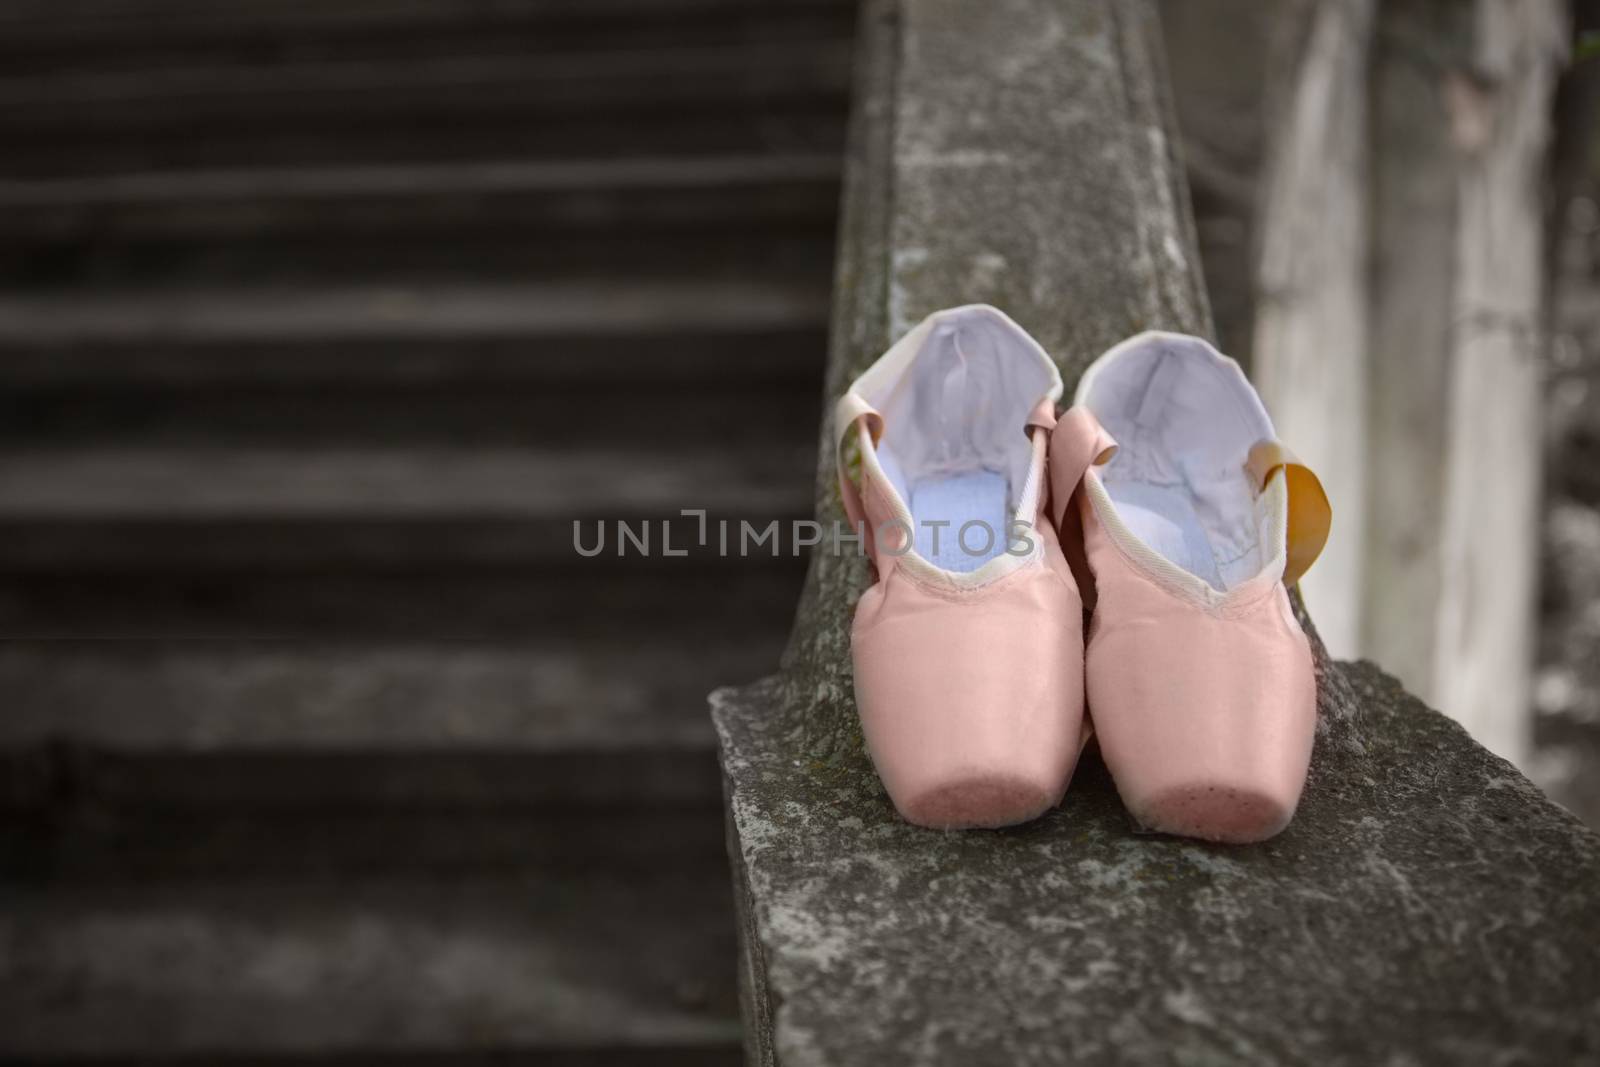 Pink pointe shoes for a classical ballerina, close-up on concrete